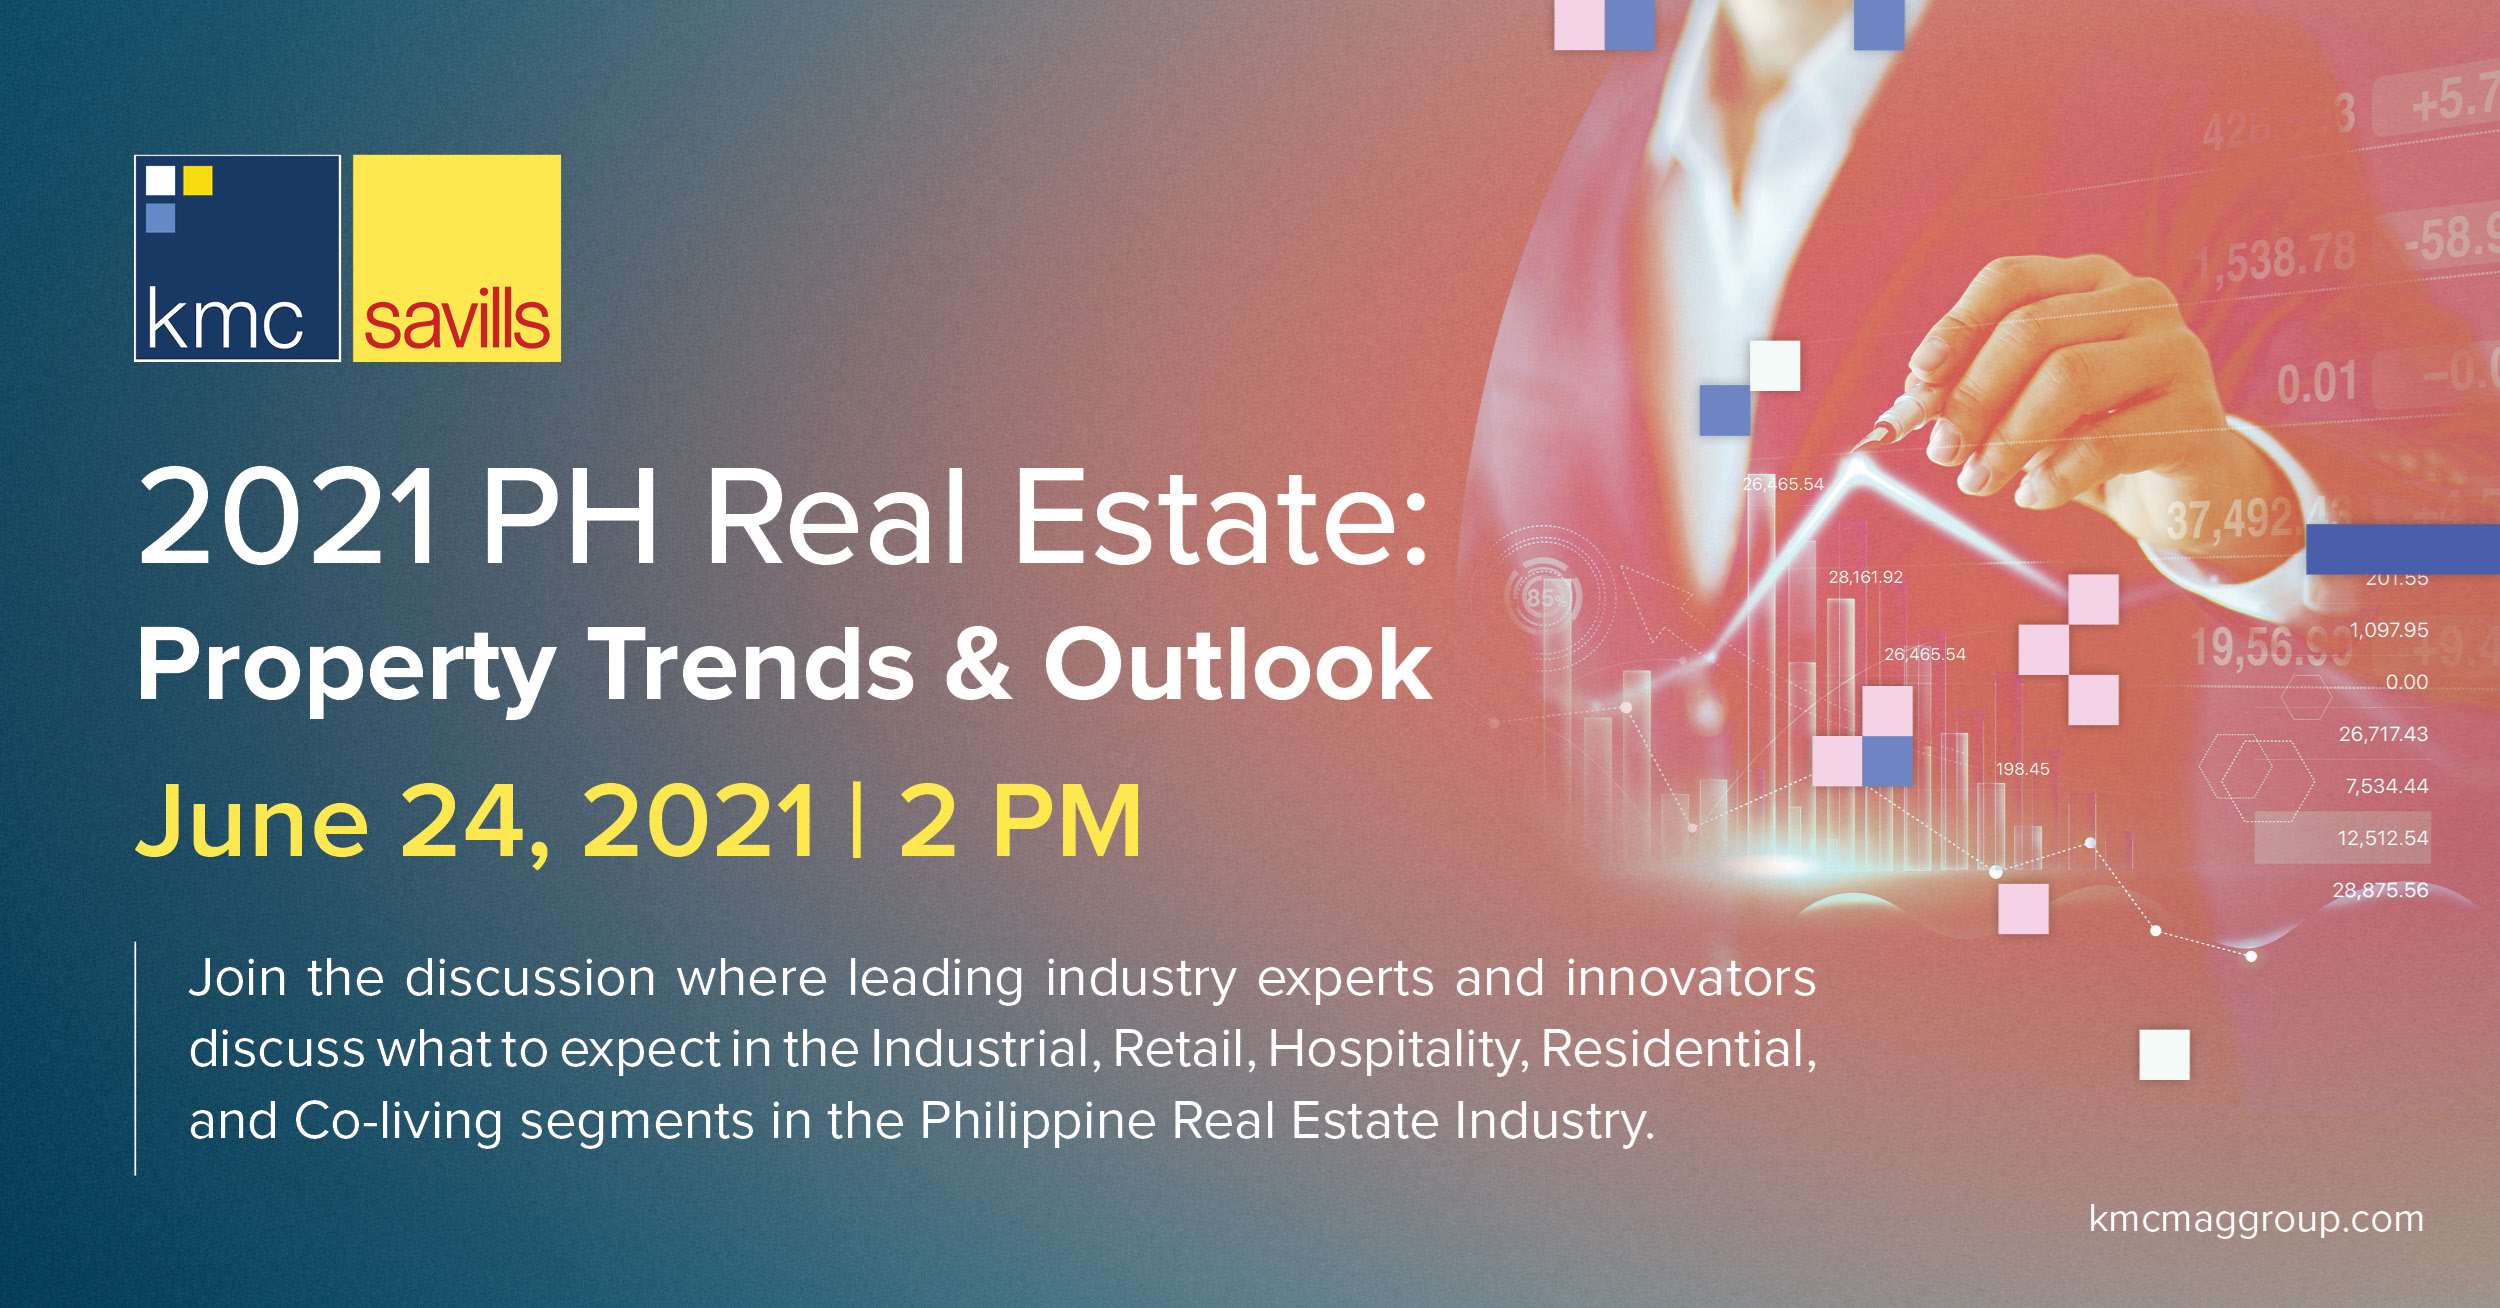 Philippine Real Estate 2021: KMC discusses outlook for property asset classes in 2021